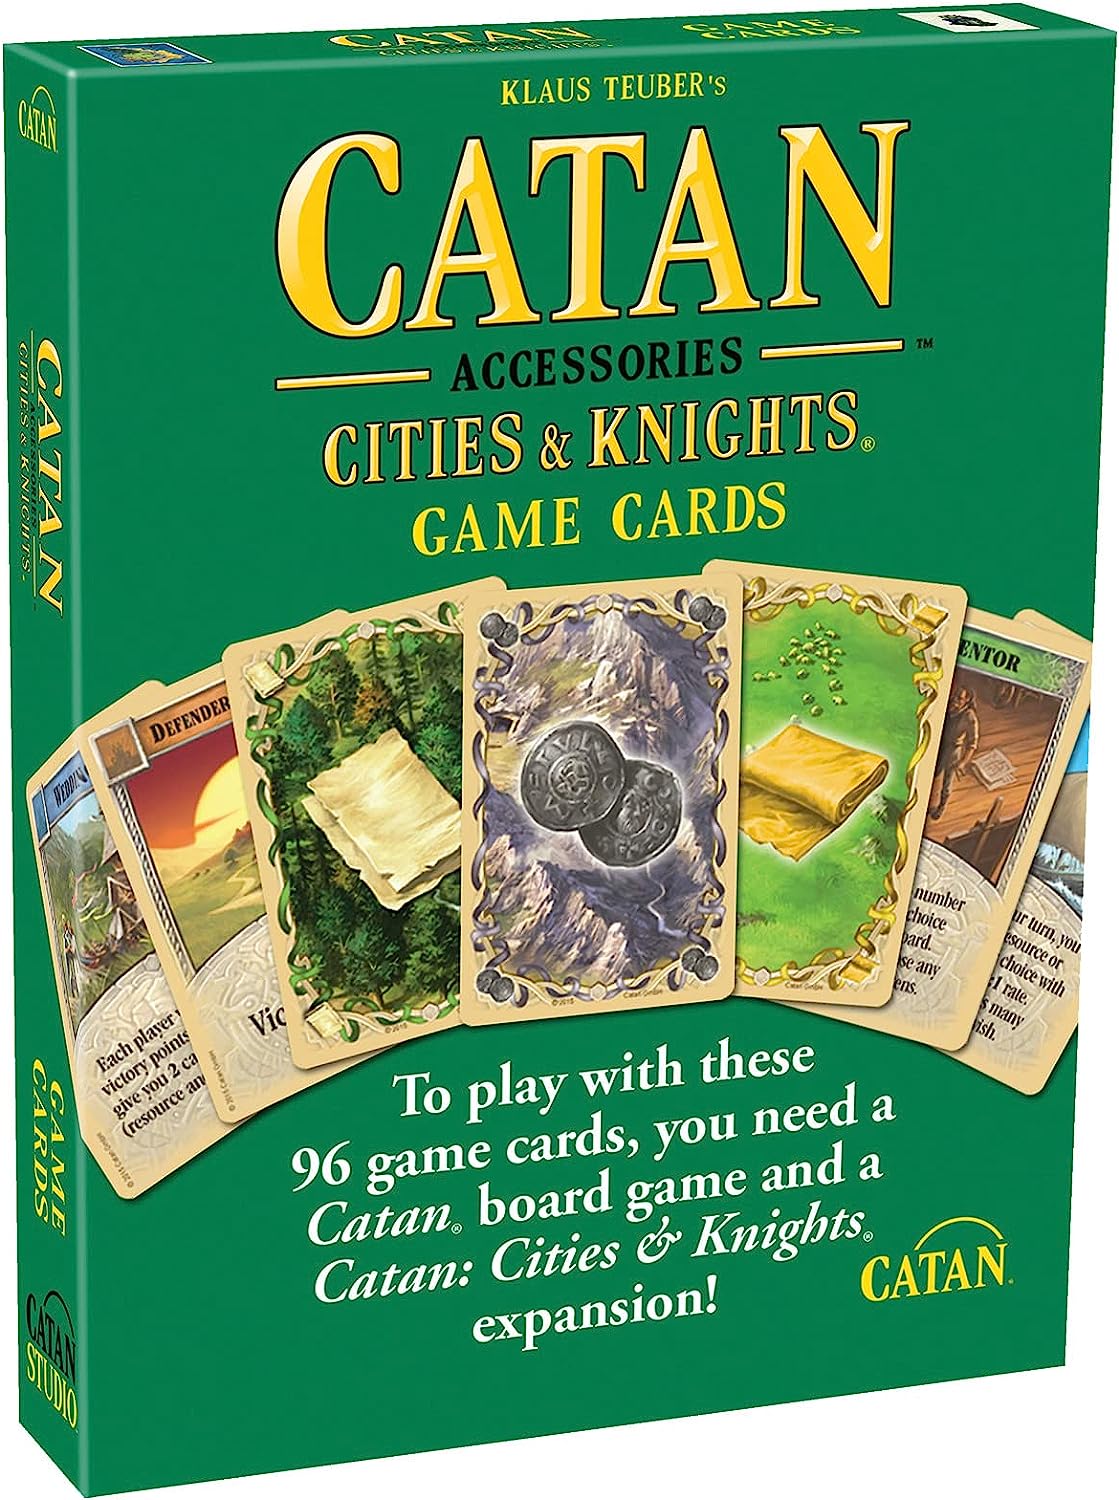 CATAN Accessories: Cities & Knights Game Cards